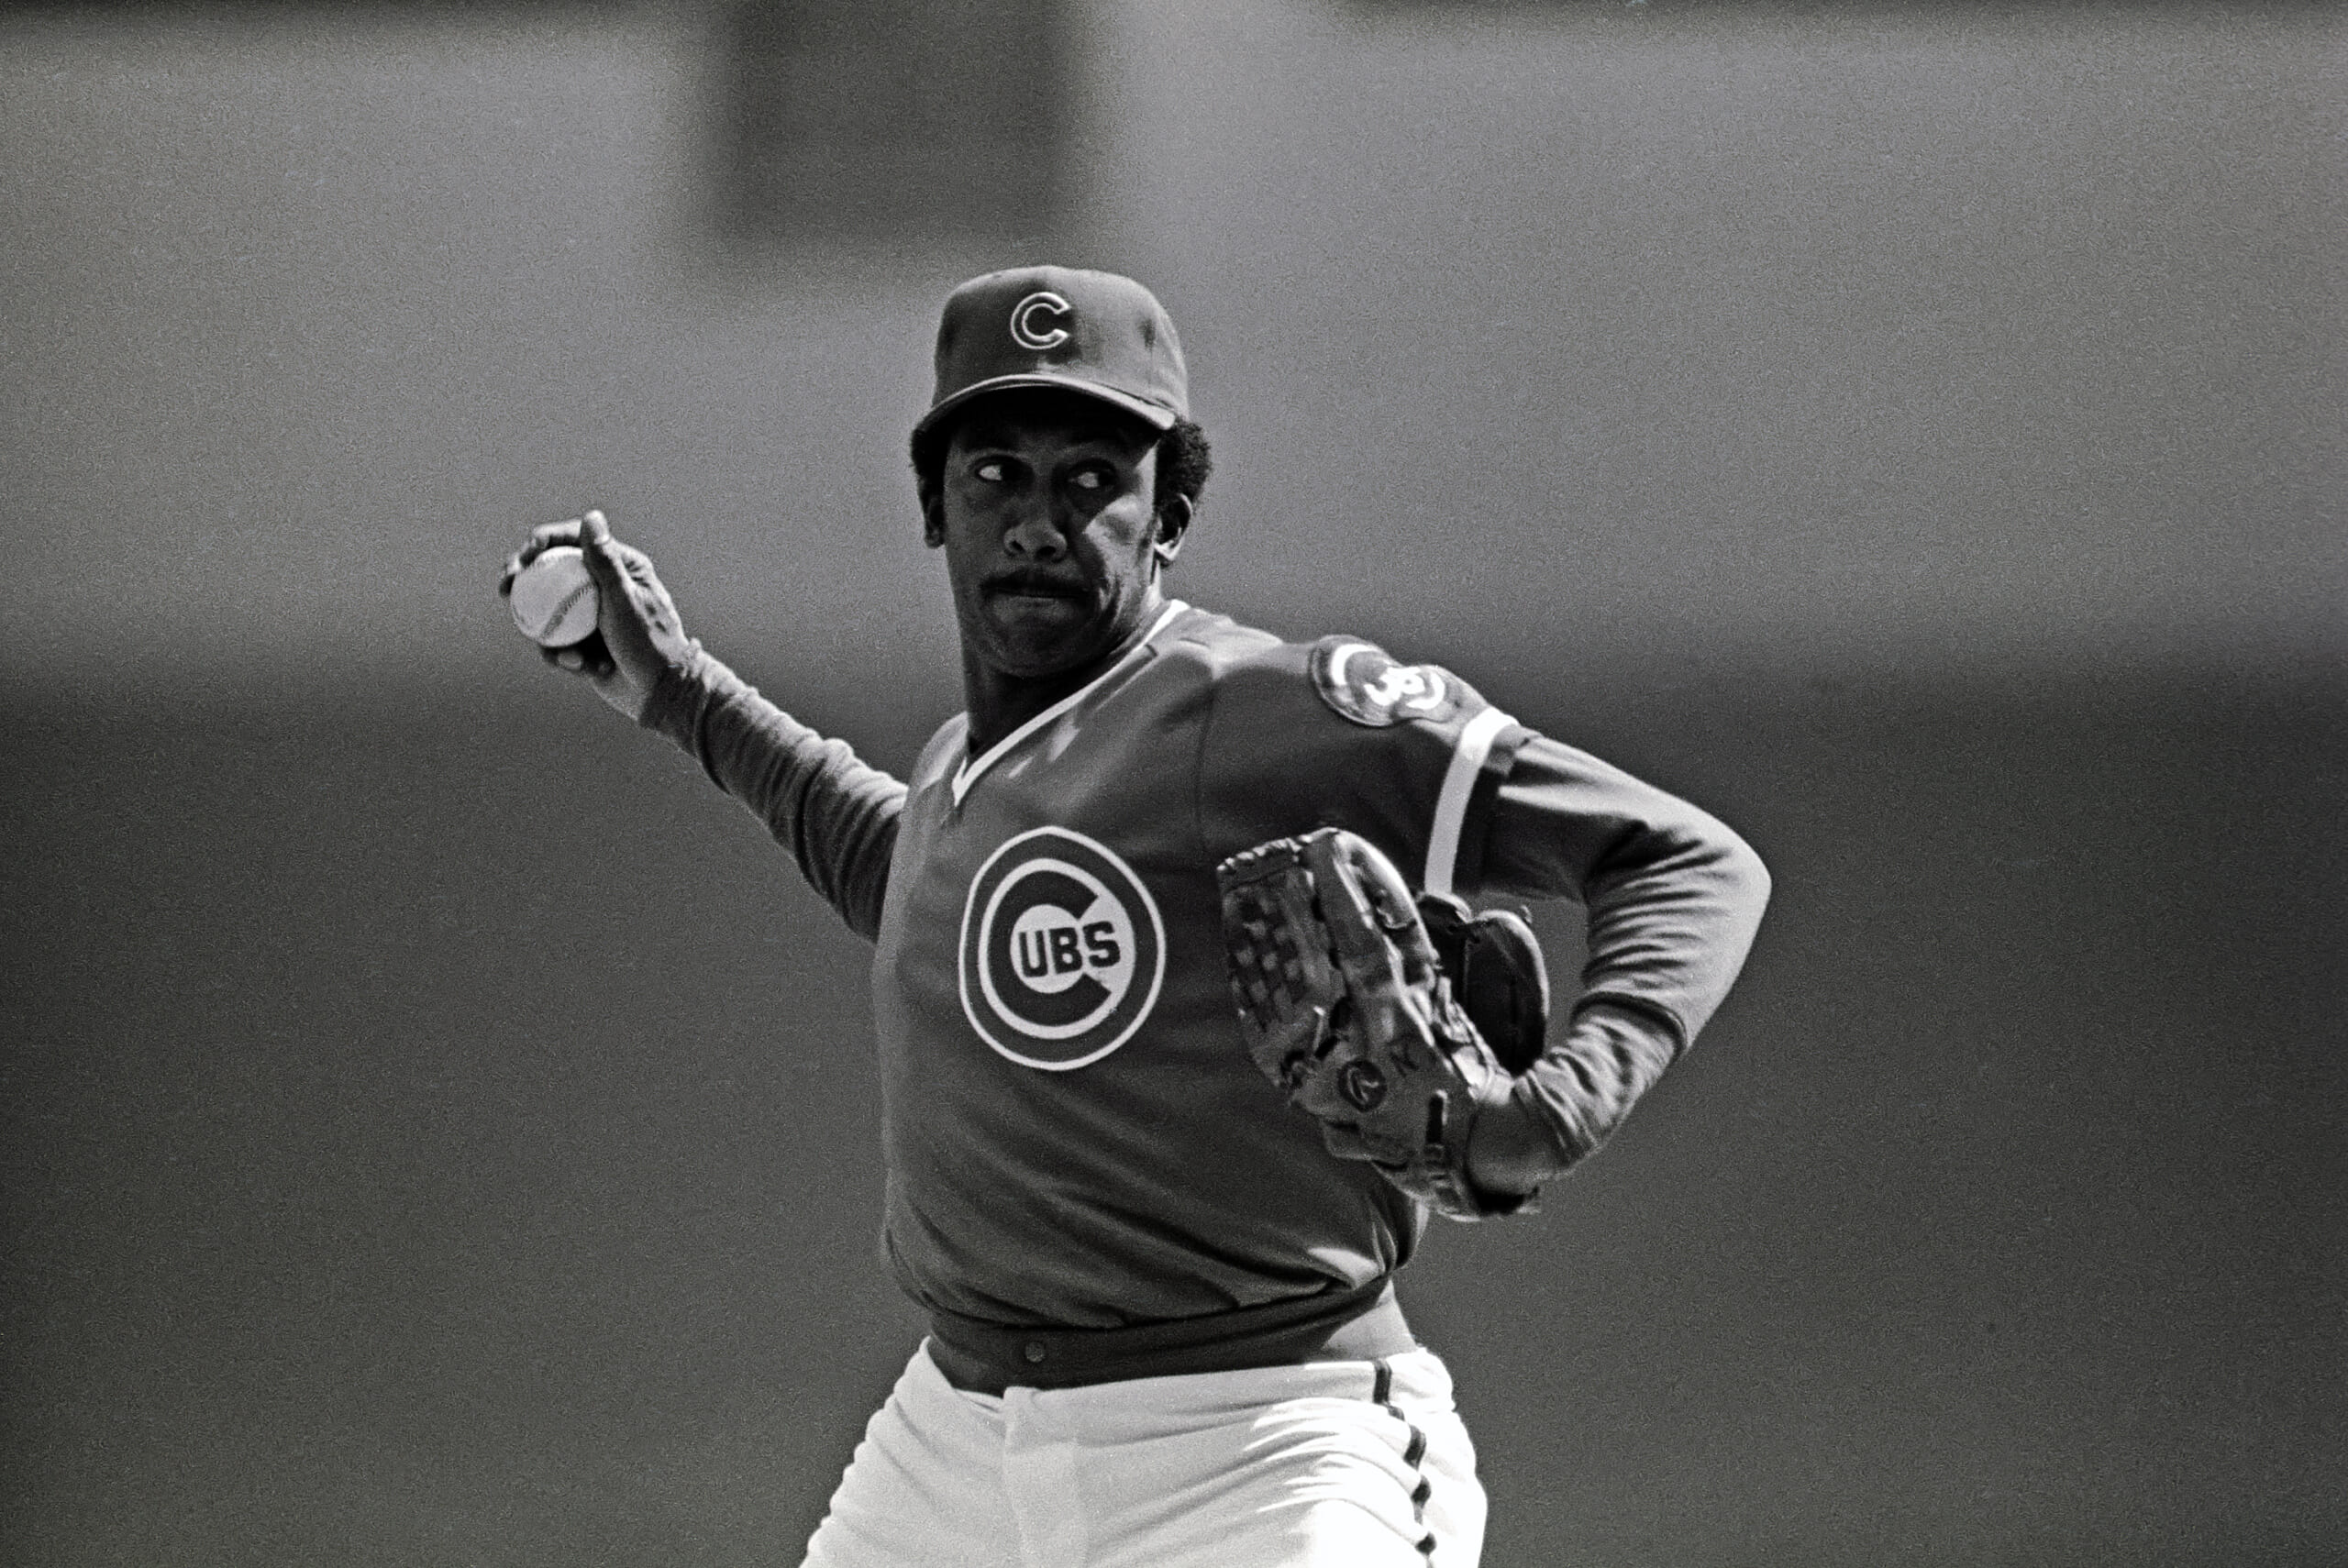 MLB Hall of Fame player Fergie Jenkins to get statue outside Wrigley